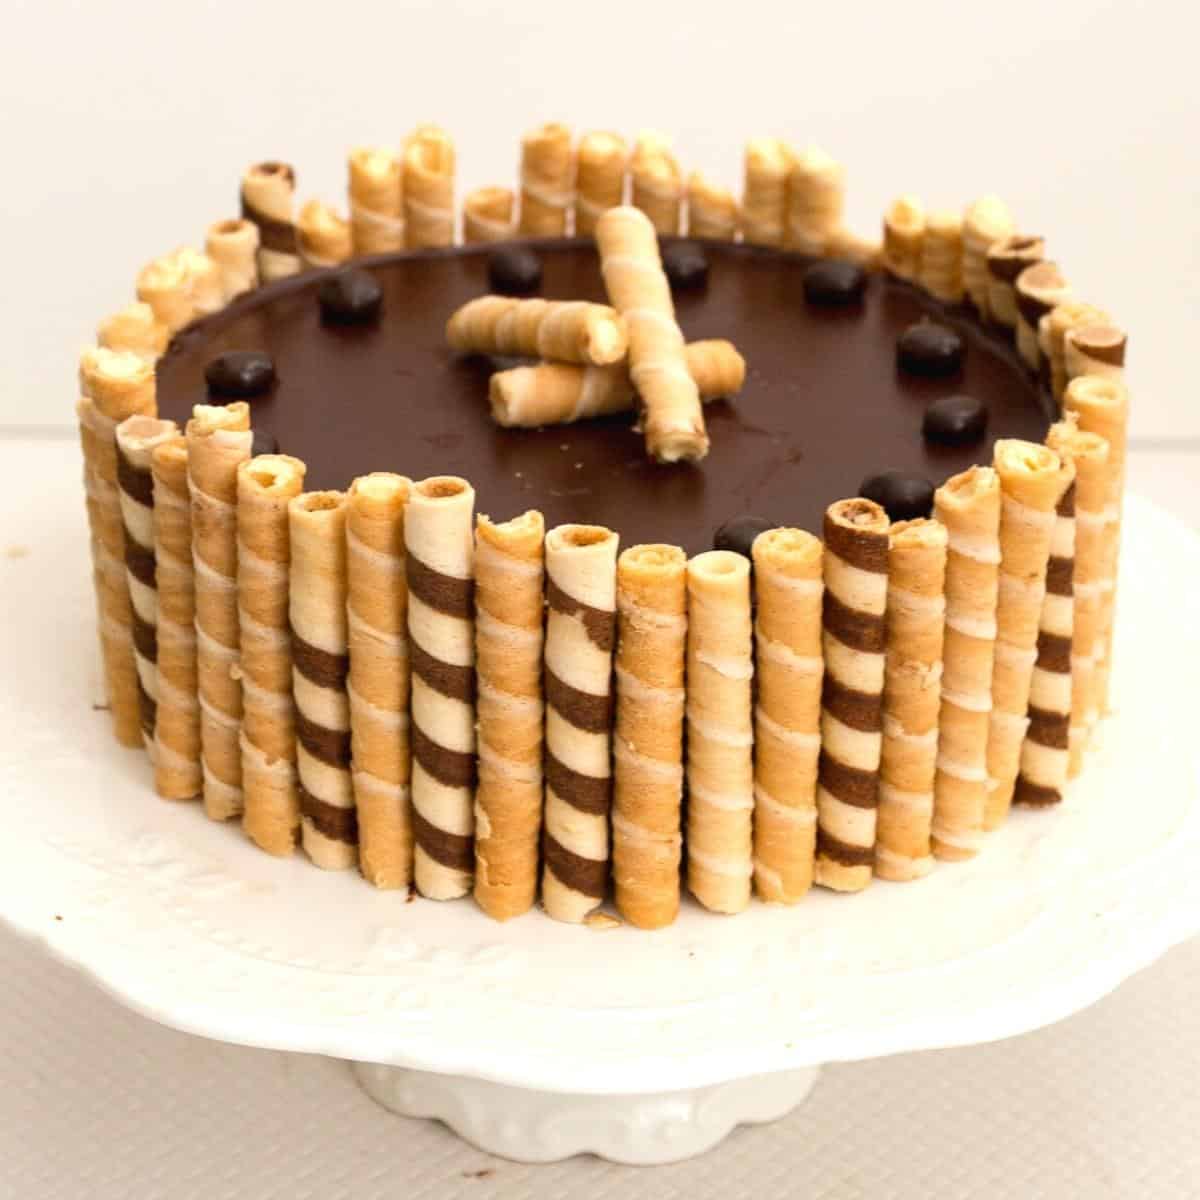 A flourless chocolate birthday cake with wafer cigars.